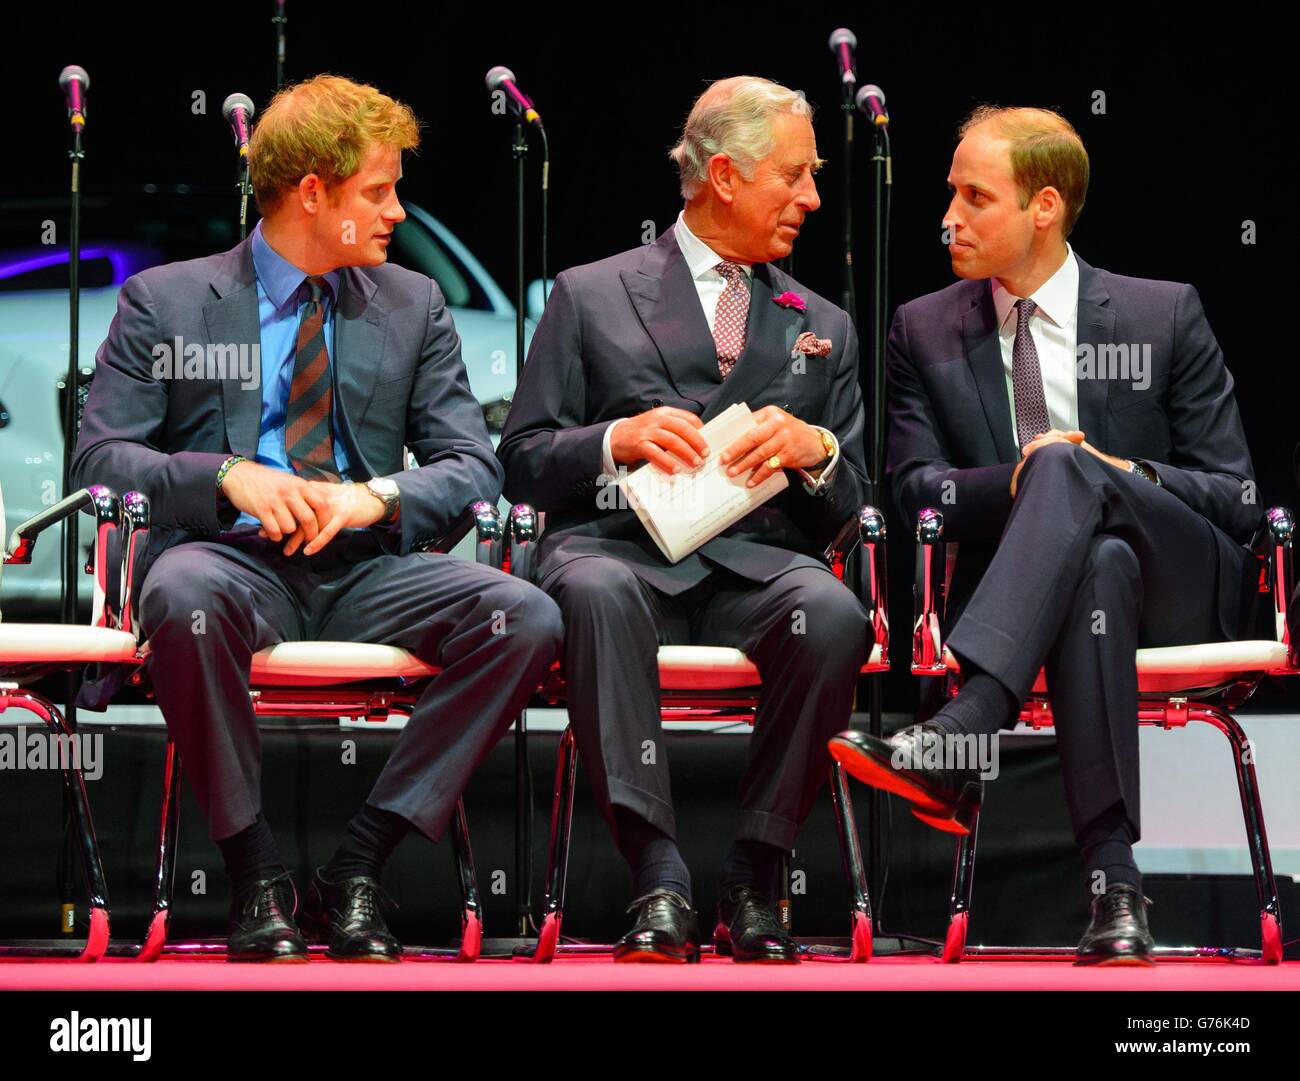 (Left - right) Prince Harry, the Prince of Wales and the Duke of Cambridge at the Business in the Community (BITC) 2014 Responsible Business Awards Gala Dinner at the Royal Albert Hall, London. Stock Photo